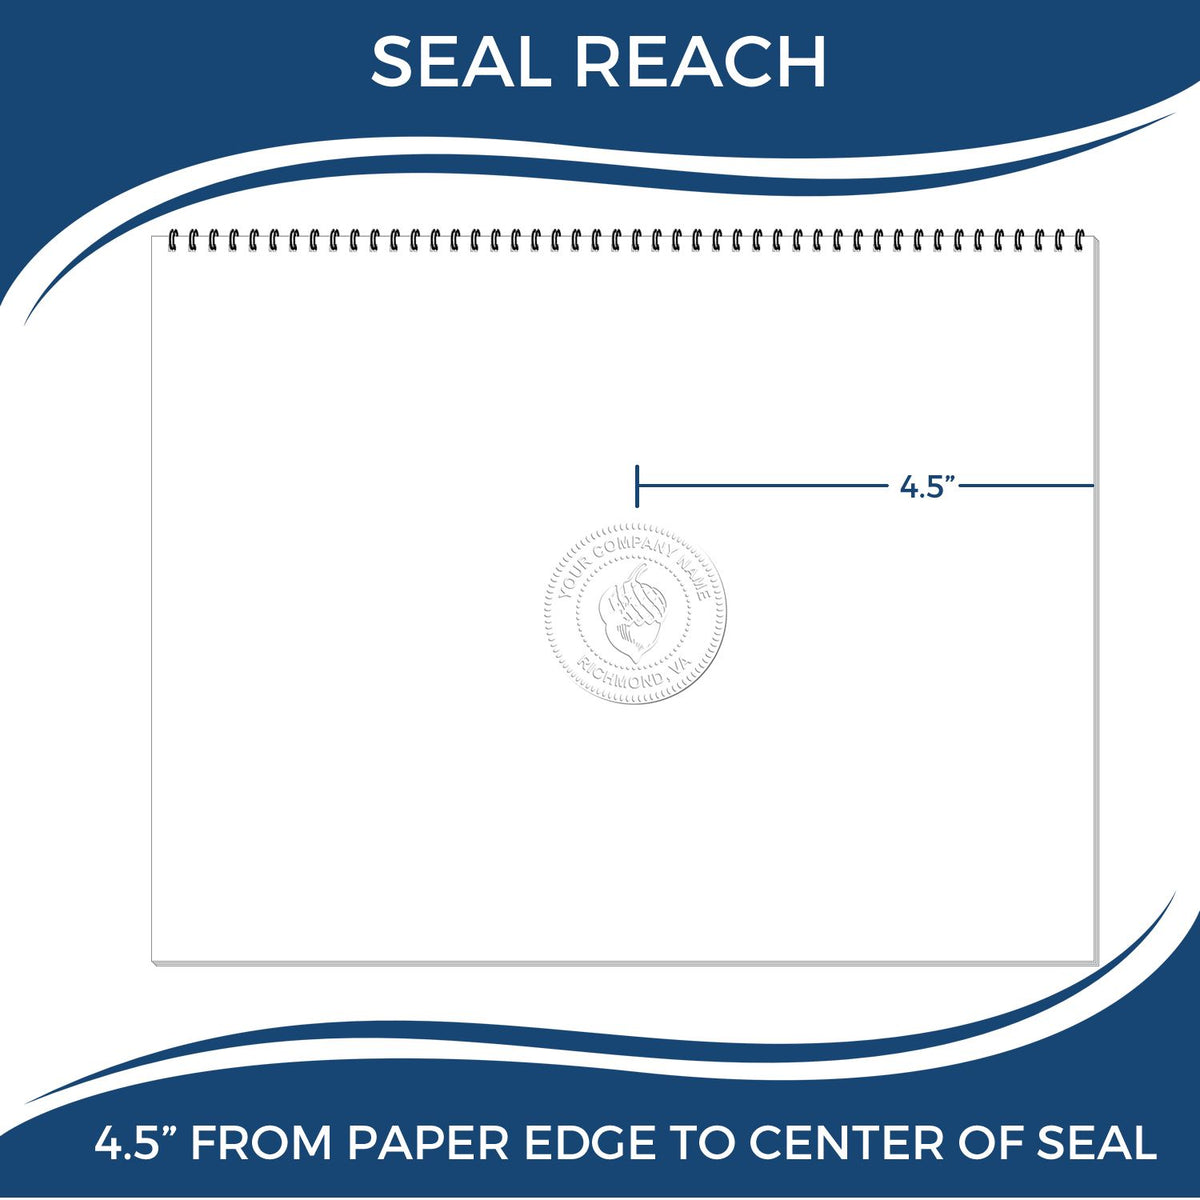 An infographic showing the seal reach which is represented by a ruler and a miniature seal image of the Extended Long Reach Arkansas Surveyor Embosser